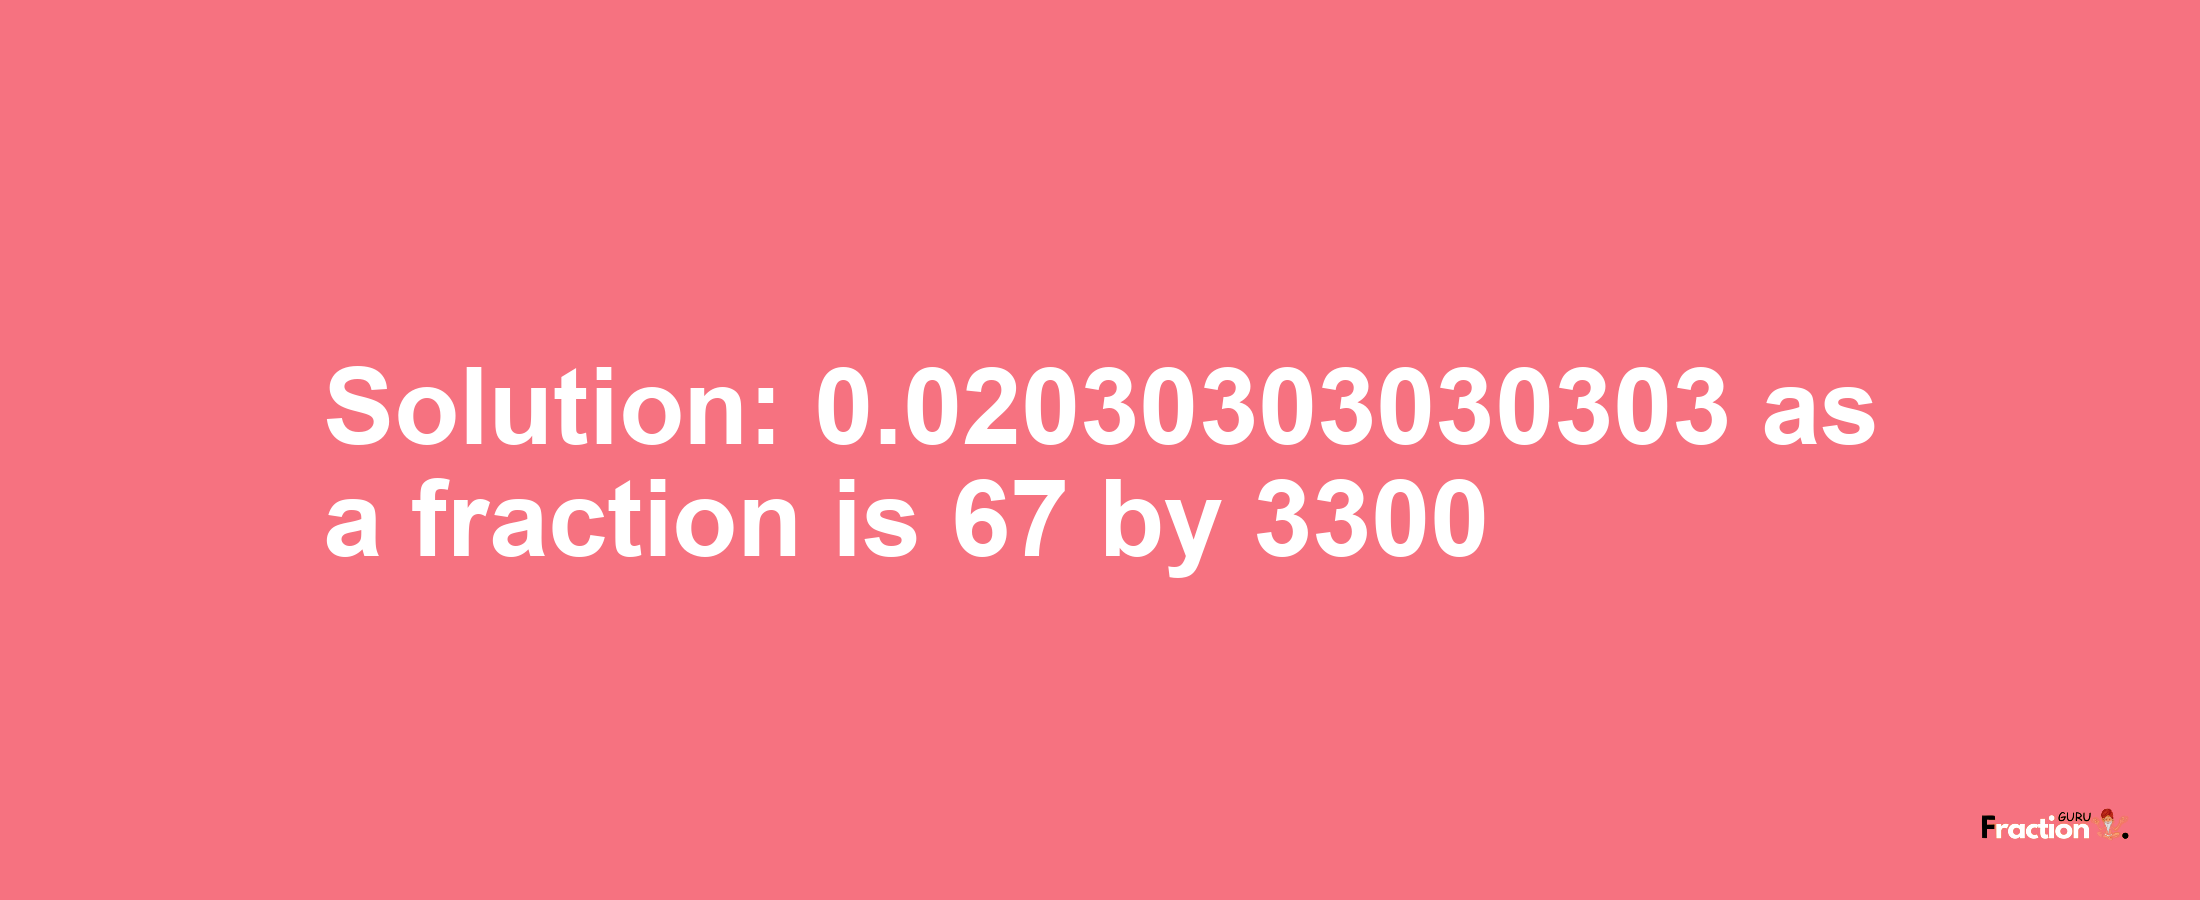 Solution:0.02030303030303 as a fraction is 67/3300